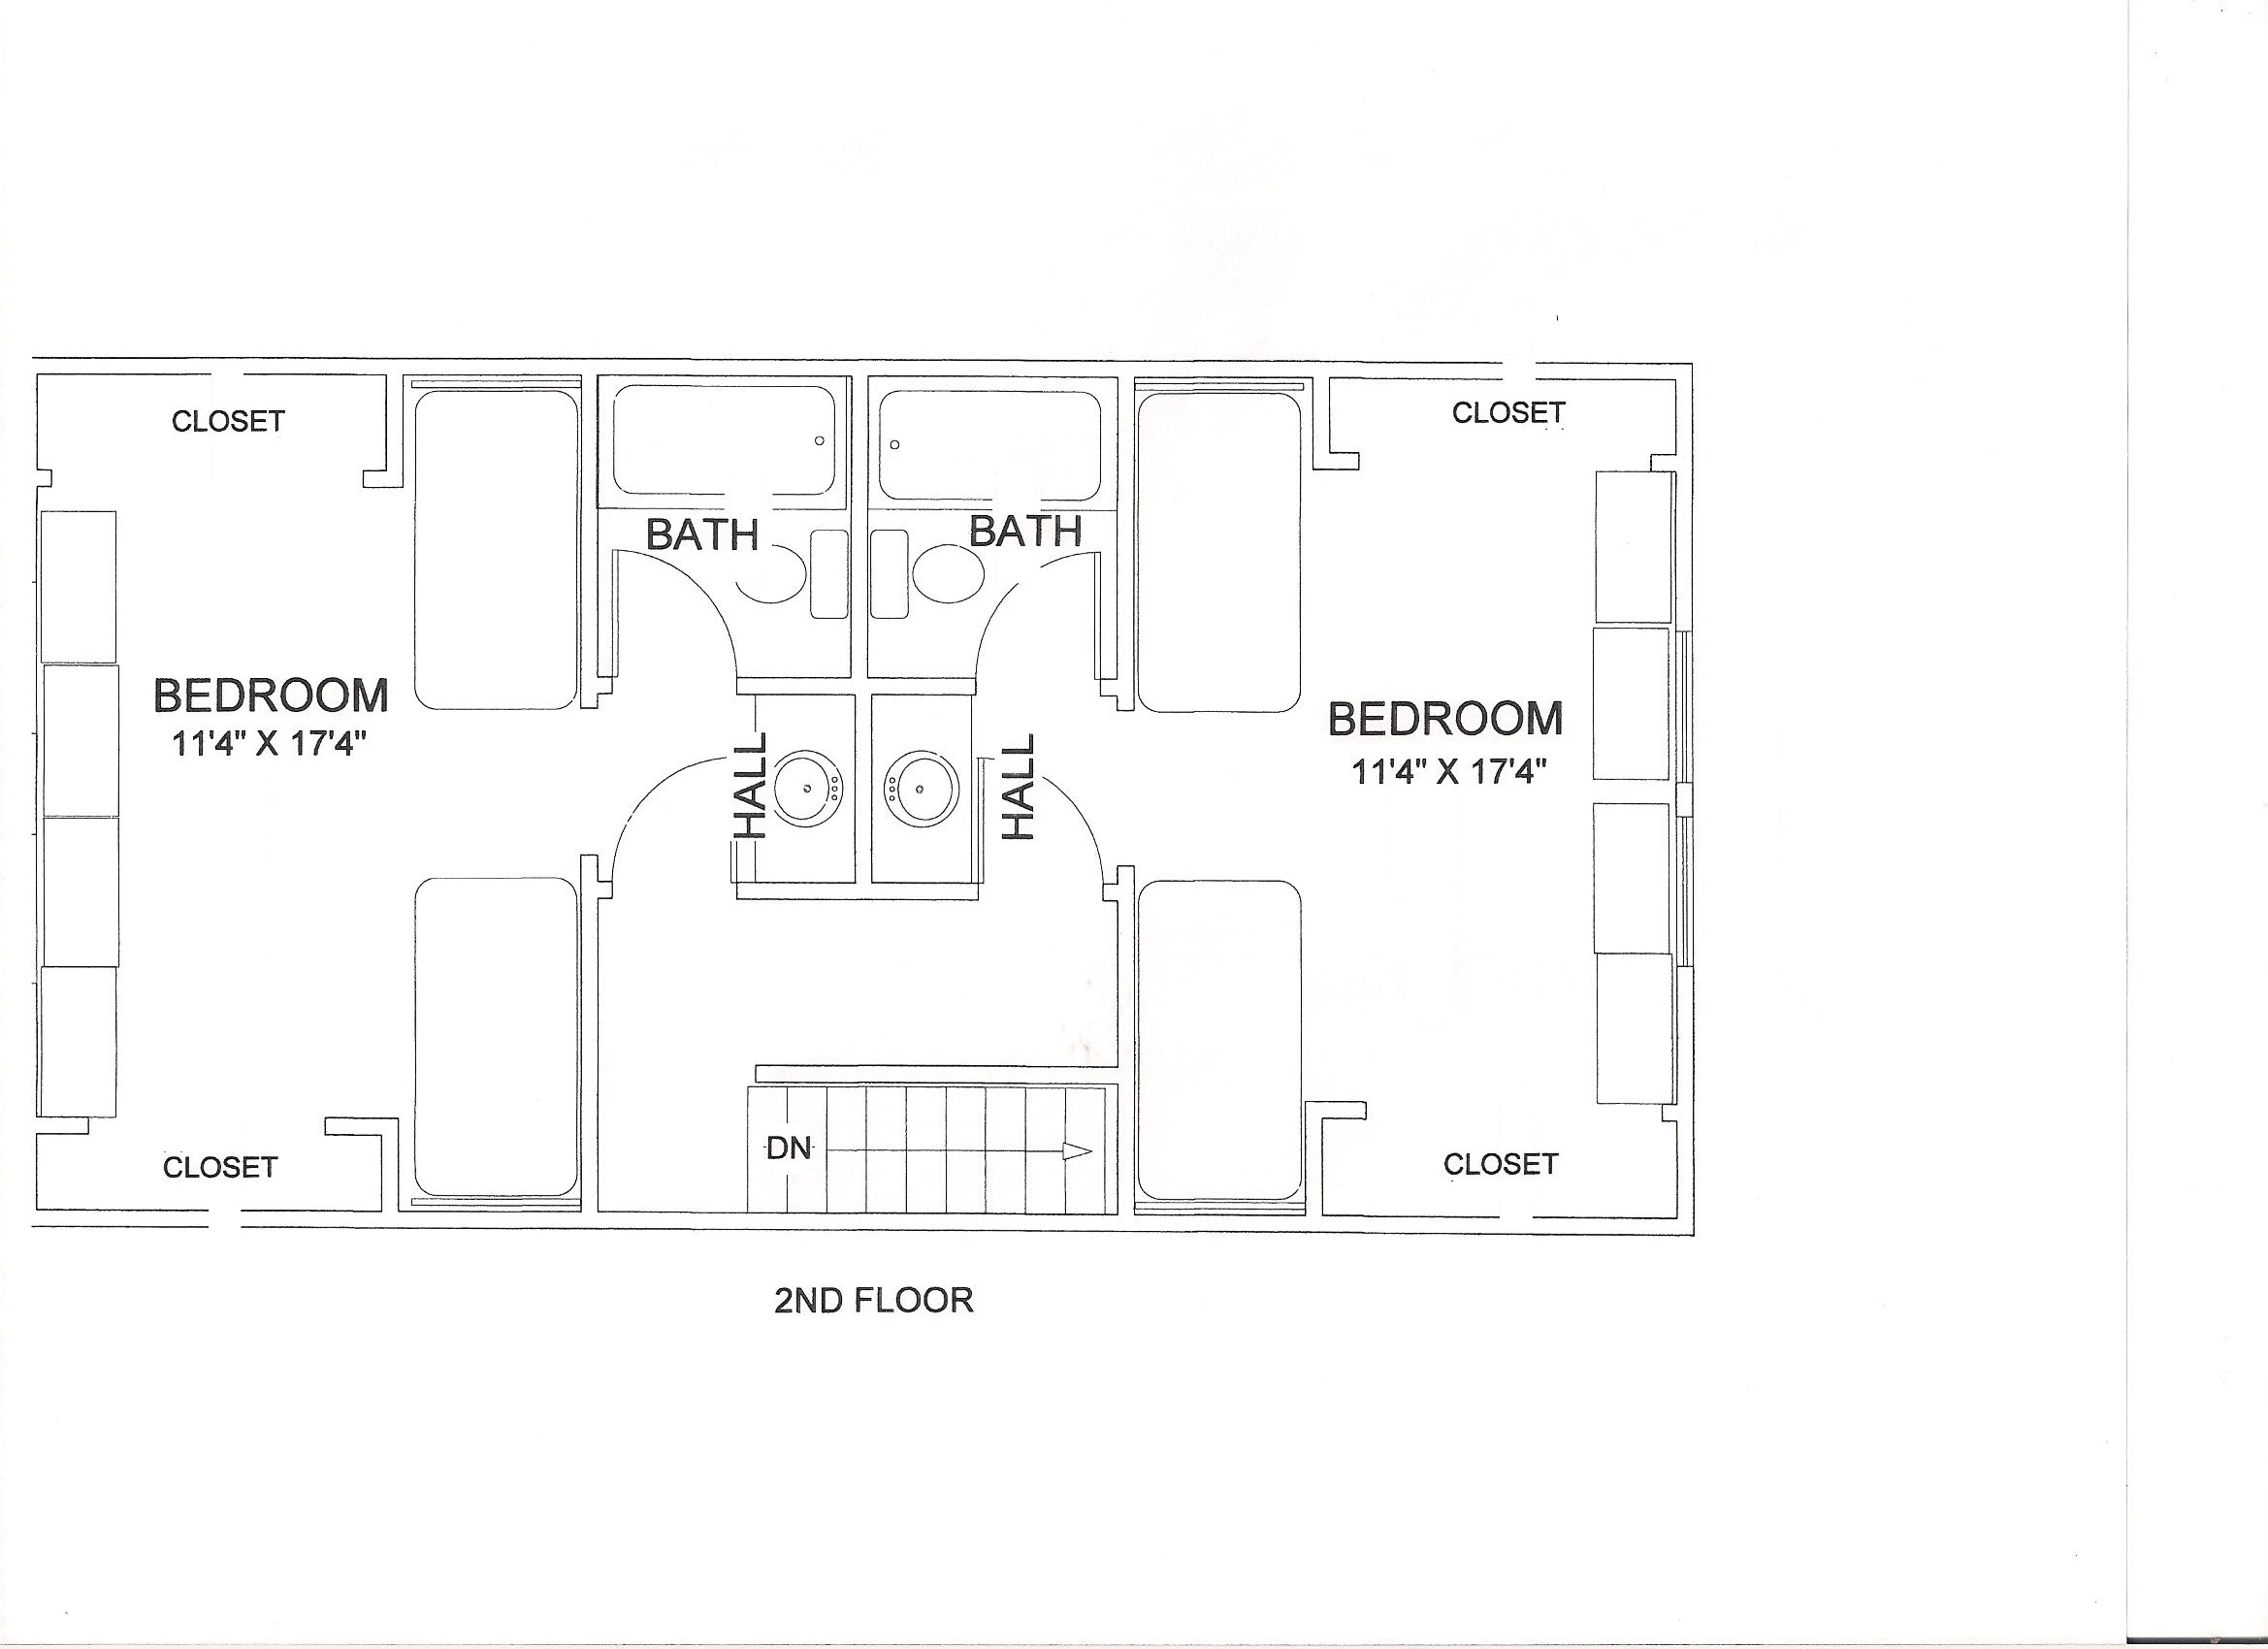 Irving Commons 2nd floor plan